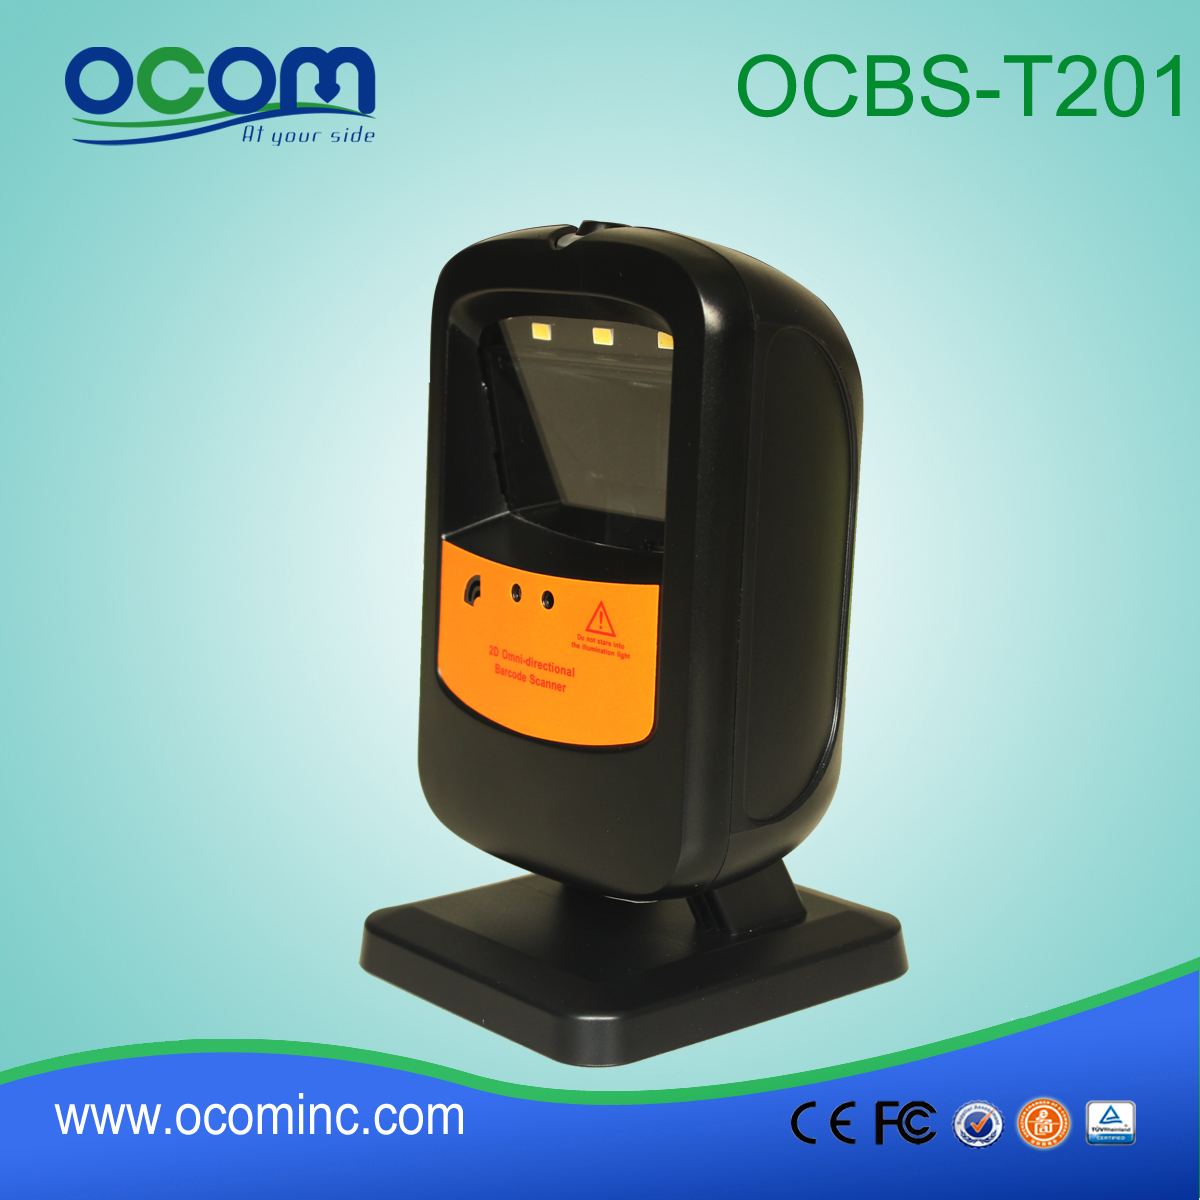 OCBS-T201 Omni-directionele 2d Barcode Scanner in POS-systeem